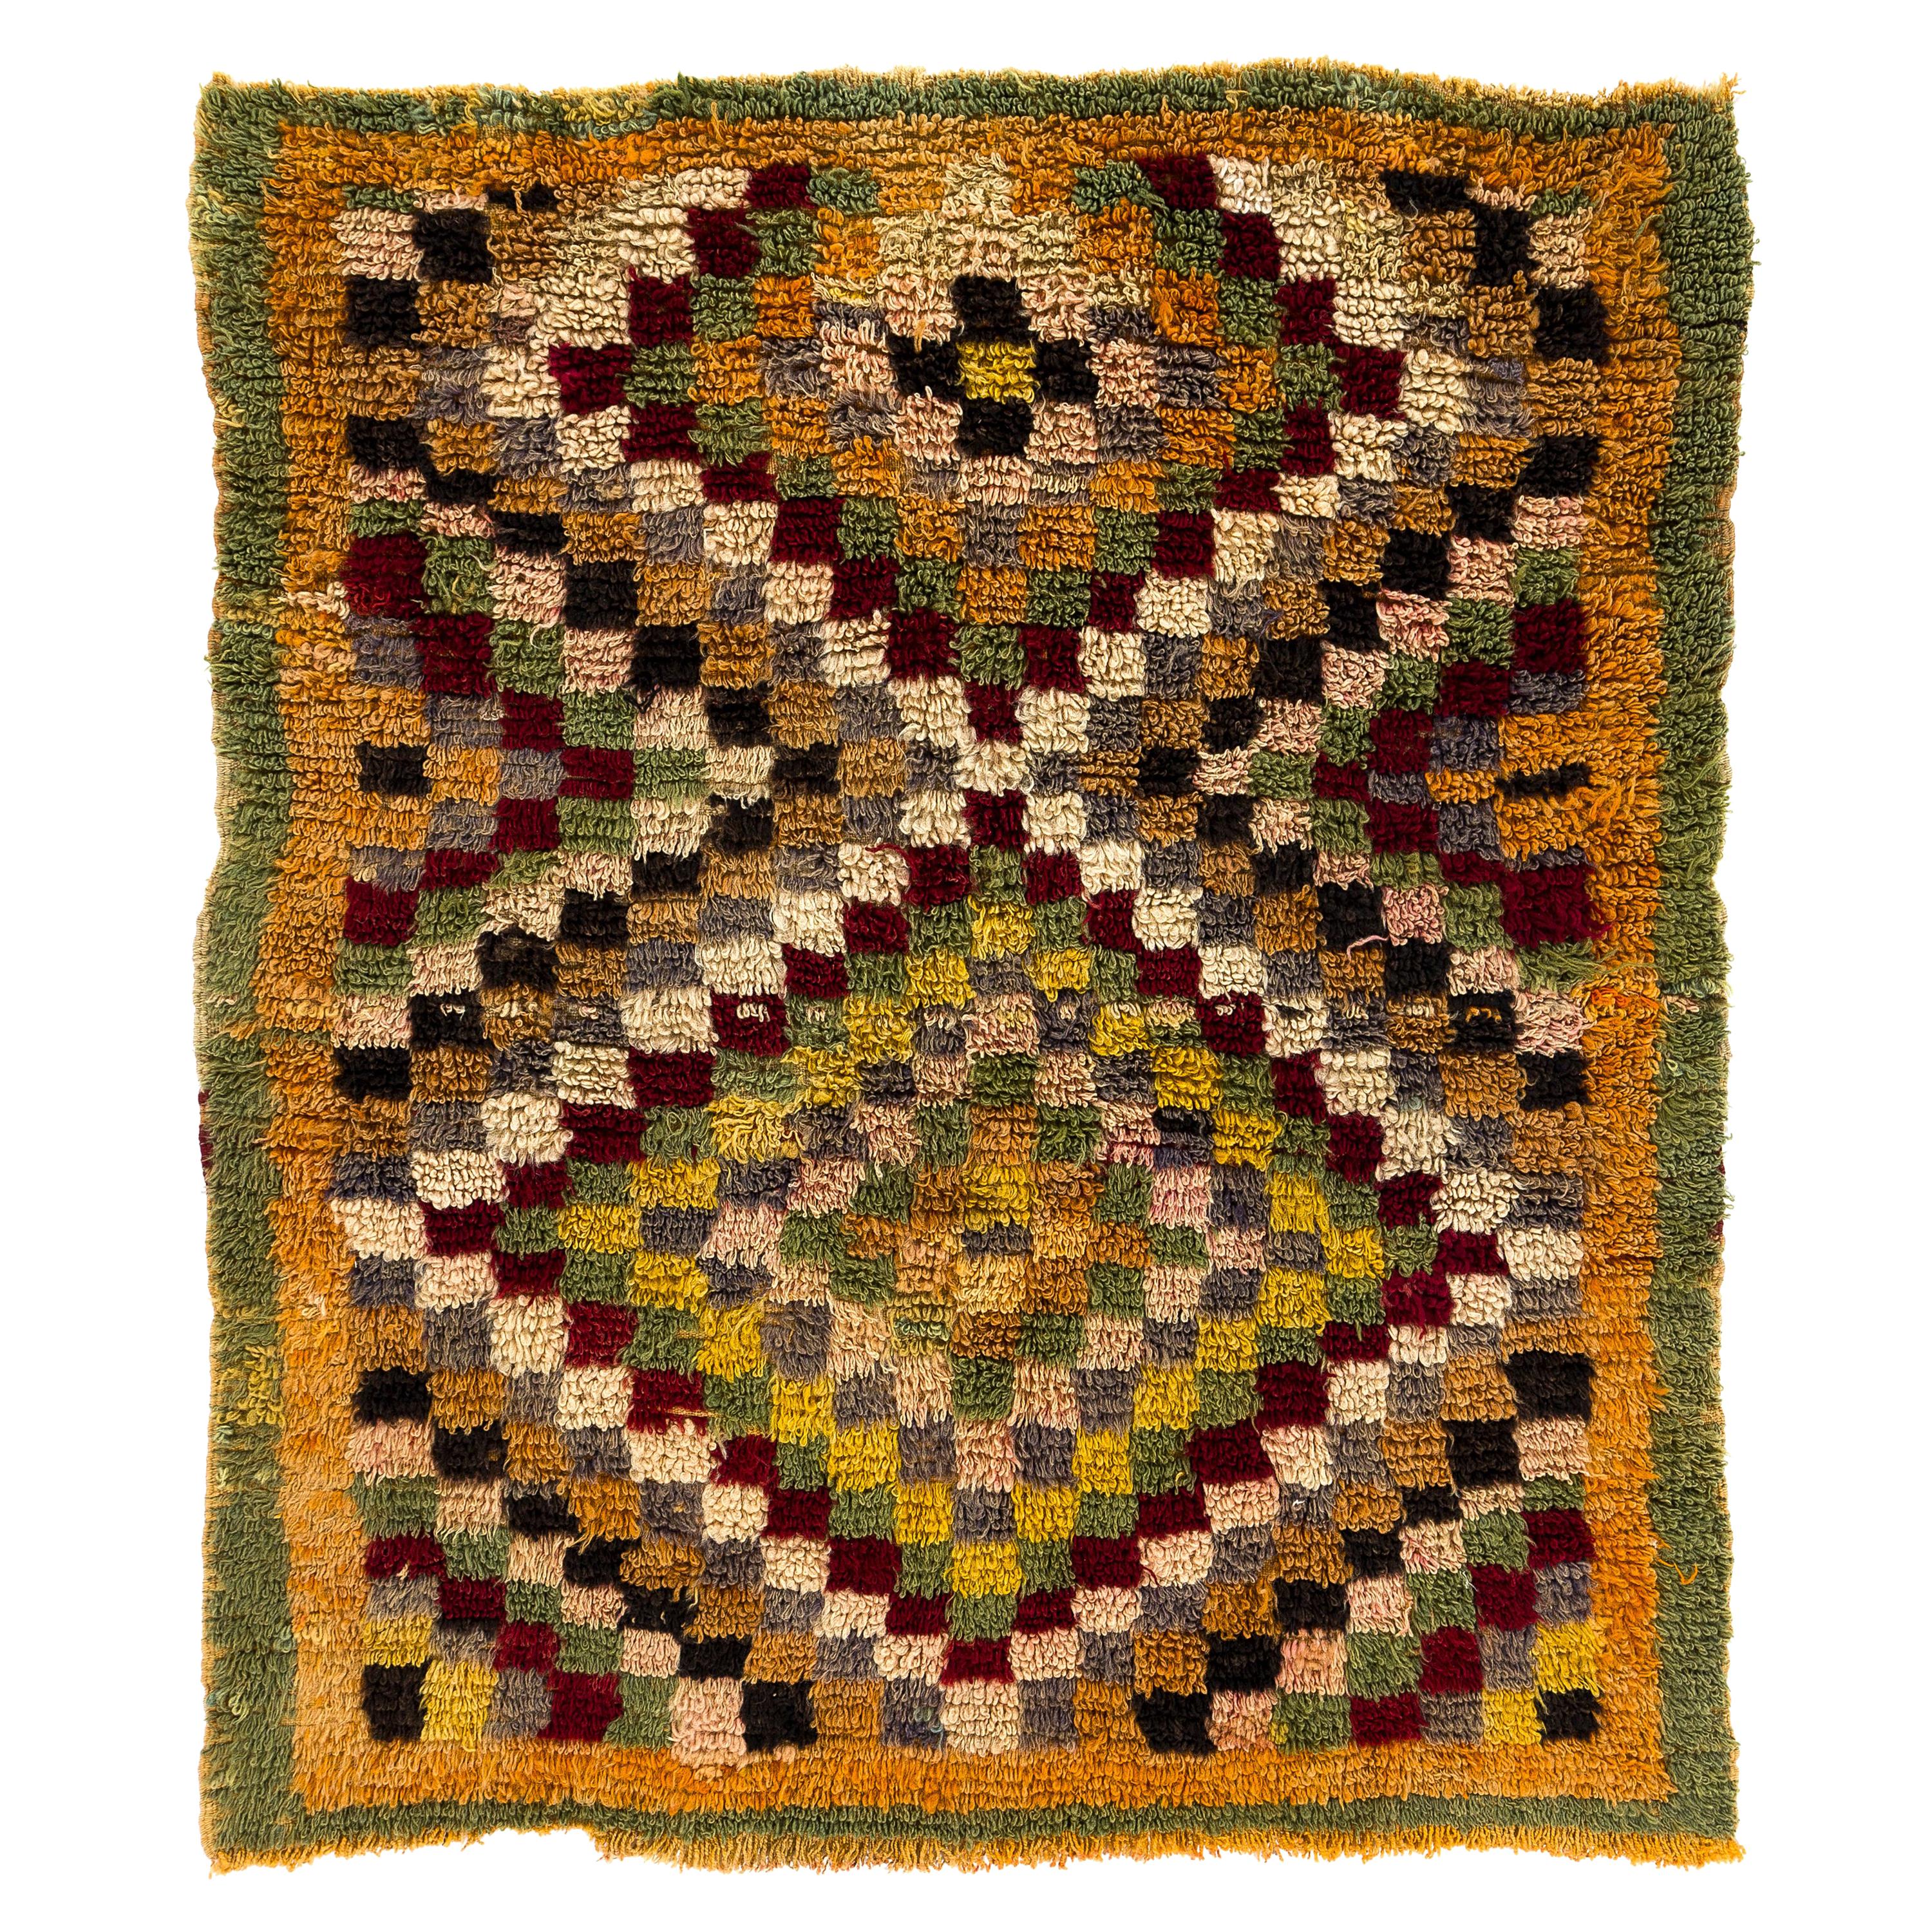 4x4.2 Ft One of a Kind Vintage Anatolian "Tulu" Rug with Checkered Design